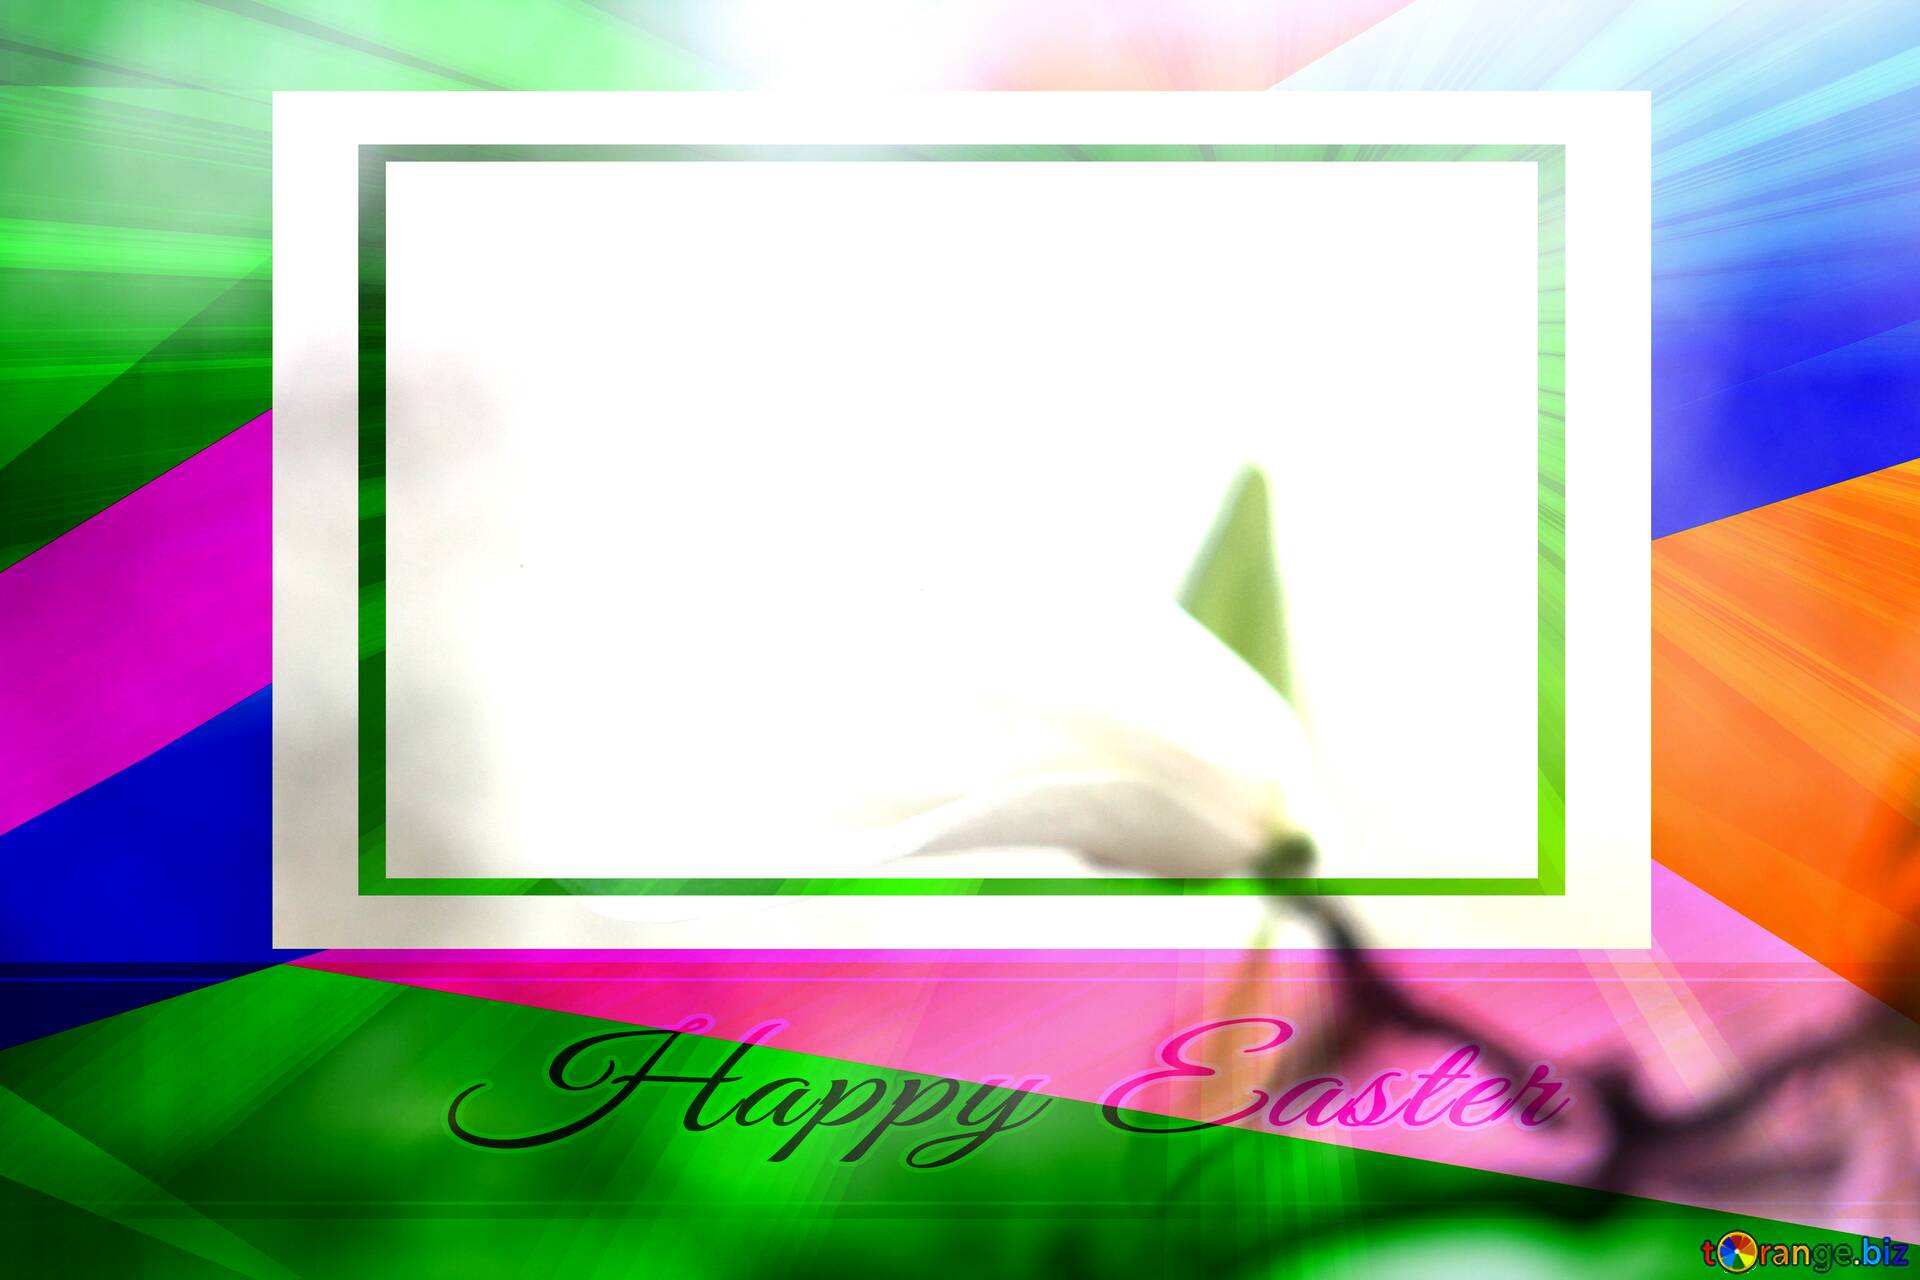 Download free picture Spring beauty wallpaper for desktop Colorful card  template frame with Inscription Happy Easter on Background with Rays of  sunlight on CC-BY License ~ Free Image Stock  ~ fx